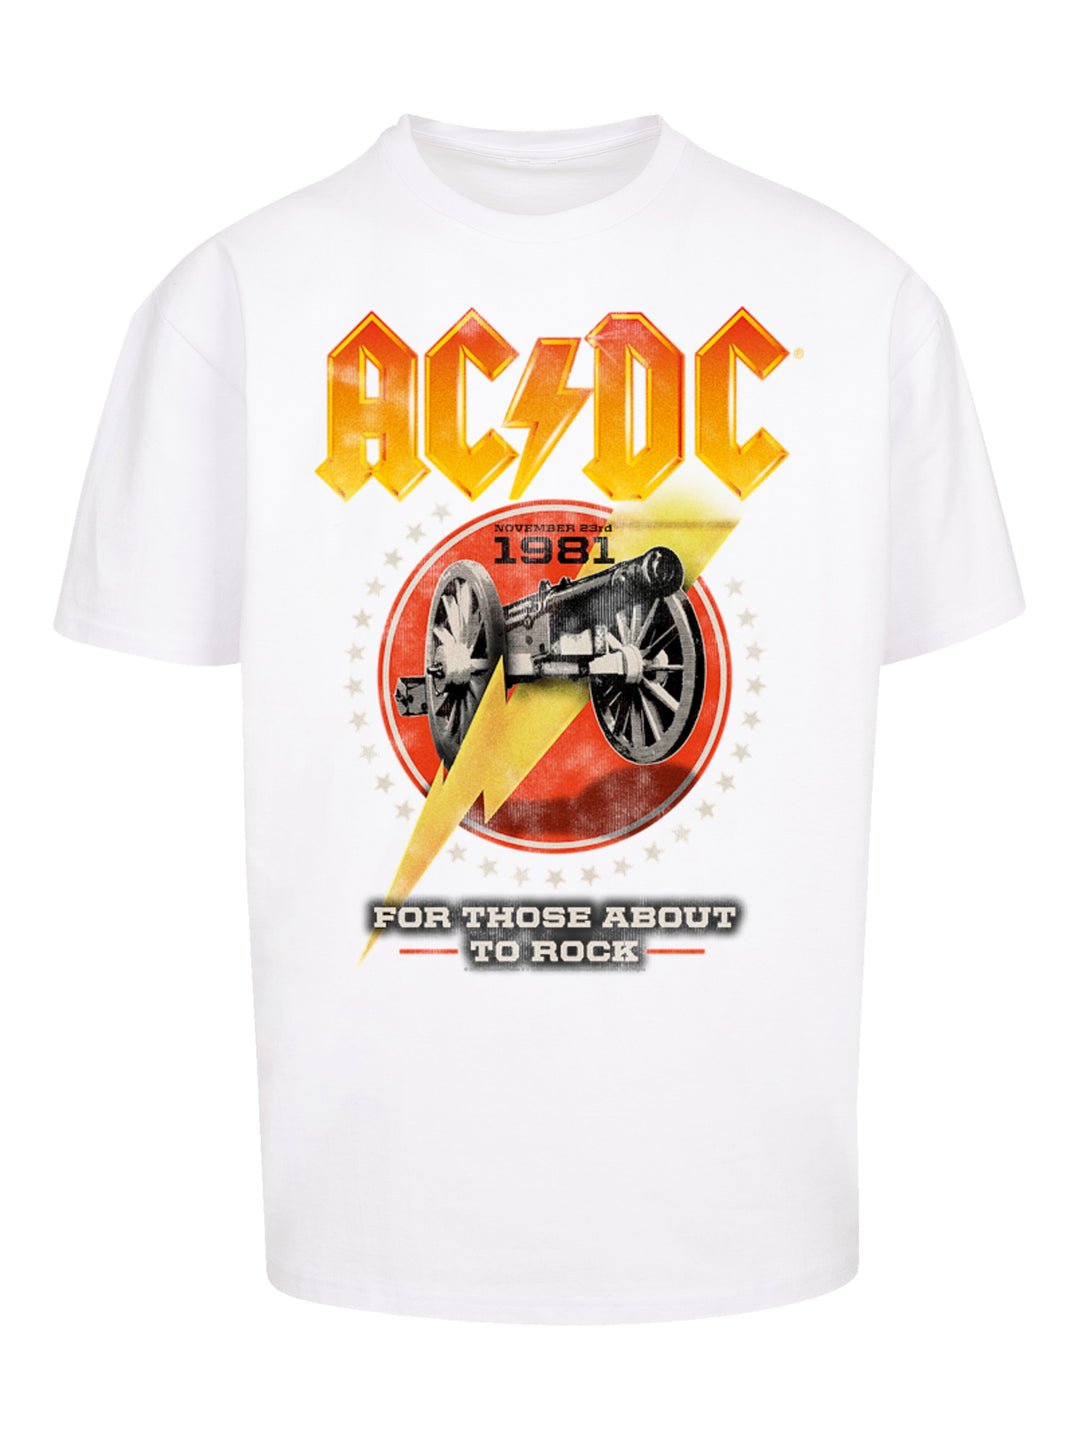 AC/DC Heavy Oversized Tee - Salute to the Iconic "For Those About To Rock" 1981 Album